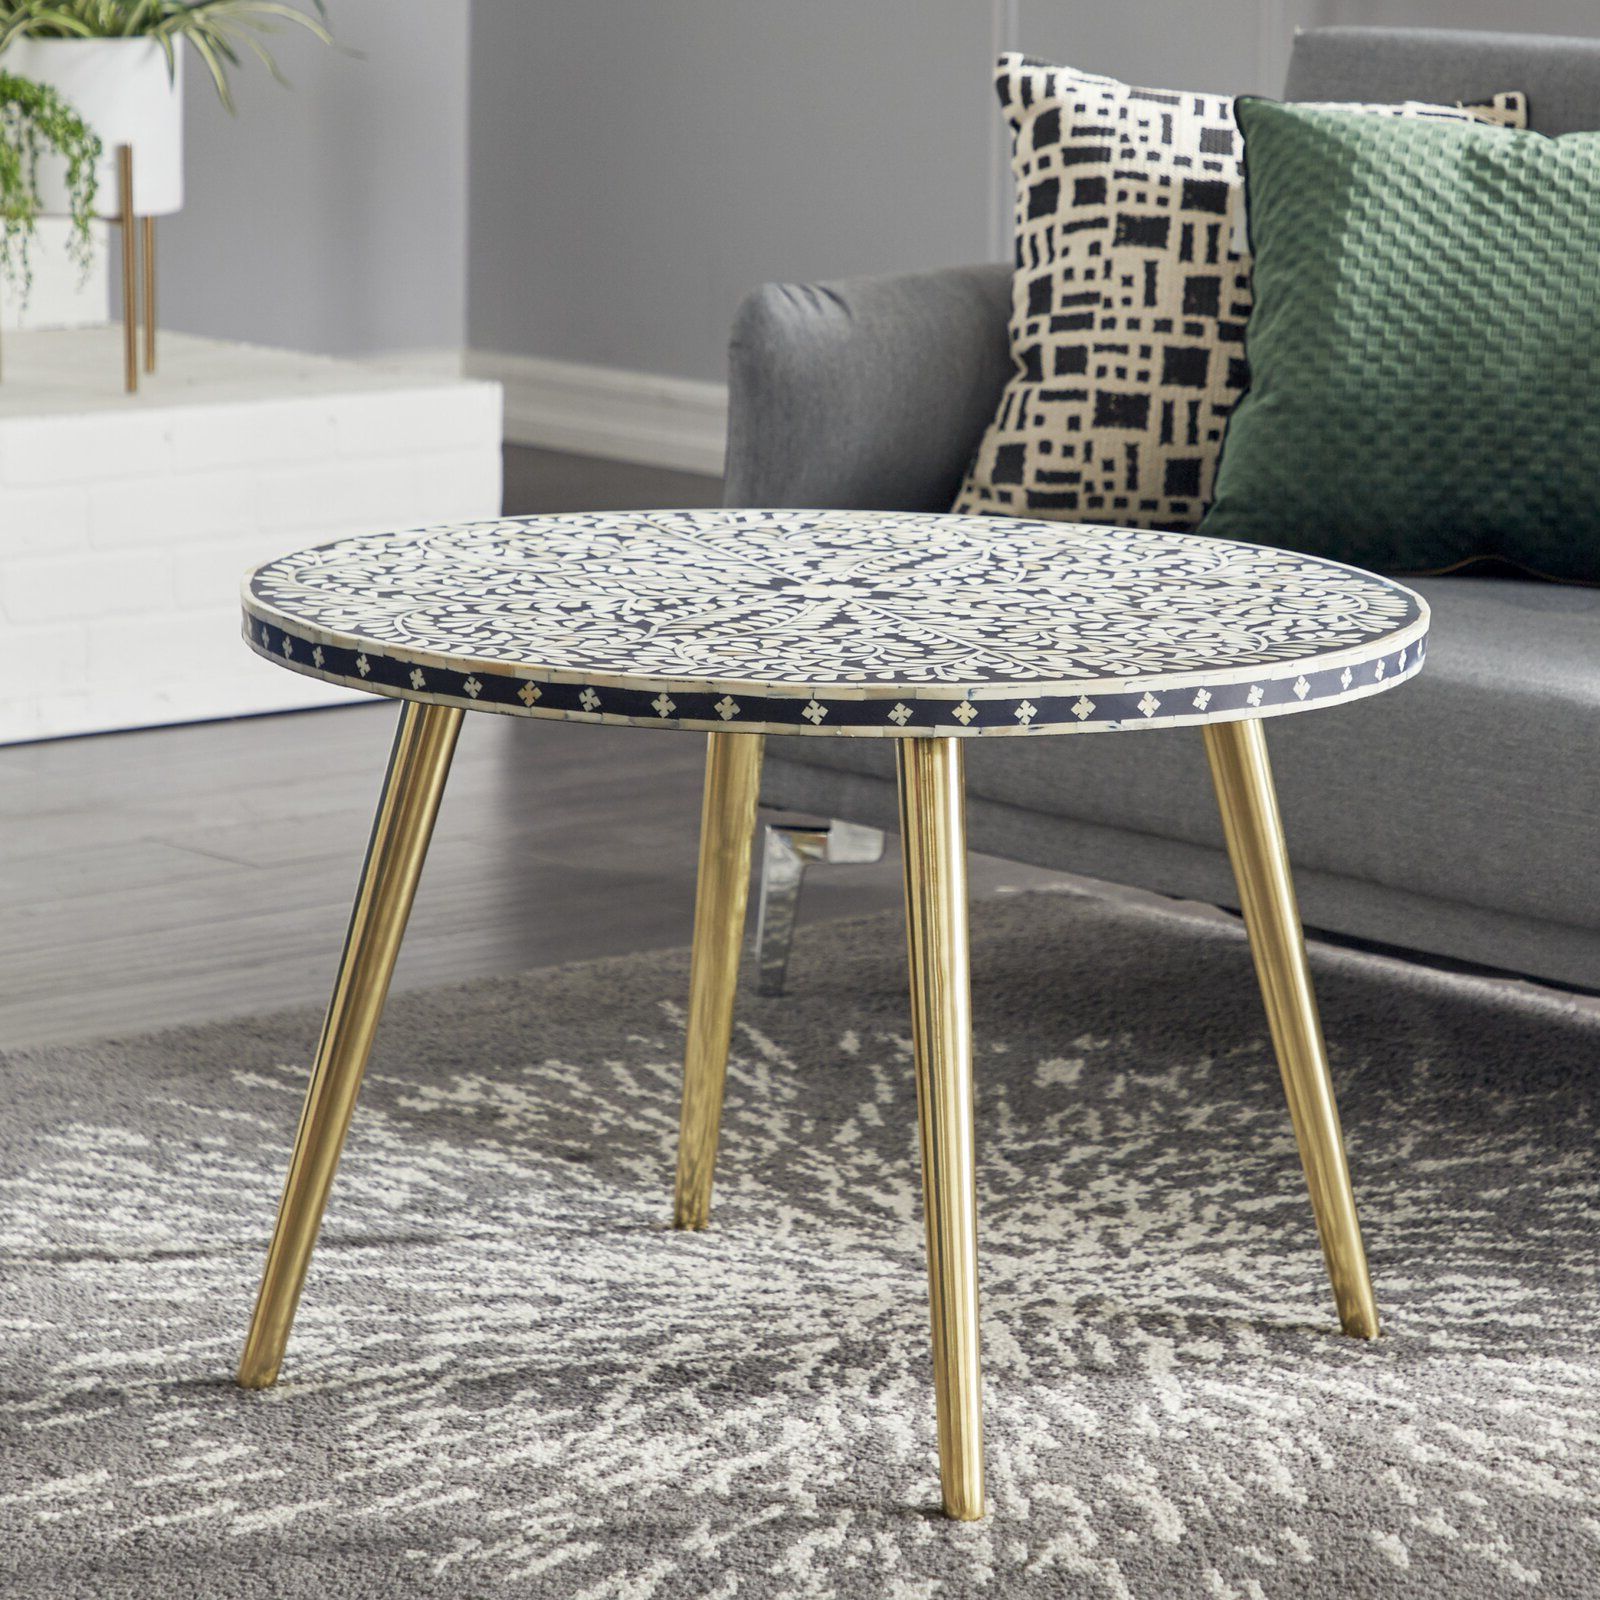 Preferred Splayed Metal Legs Coffee Tables With Estey Coffee Table, Top Material: Manufactured Wood, Features Shell Inlays  In Swirling Leaves Flourish On The Smooth Black Wooden Tabletop, And  Supported4 Splayed Tapered Legs In A Metal – Walmart (View 9 of 20)